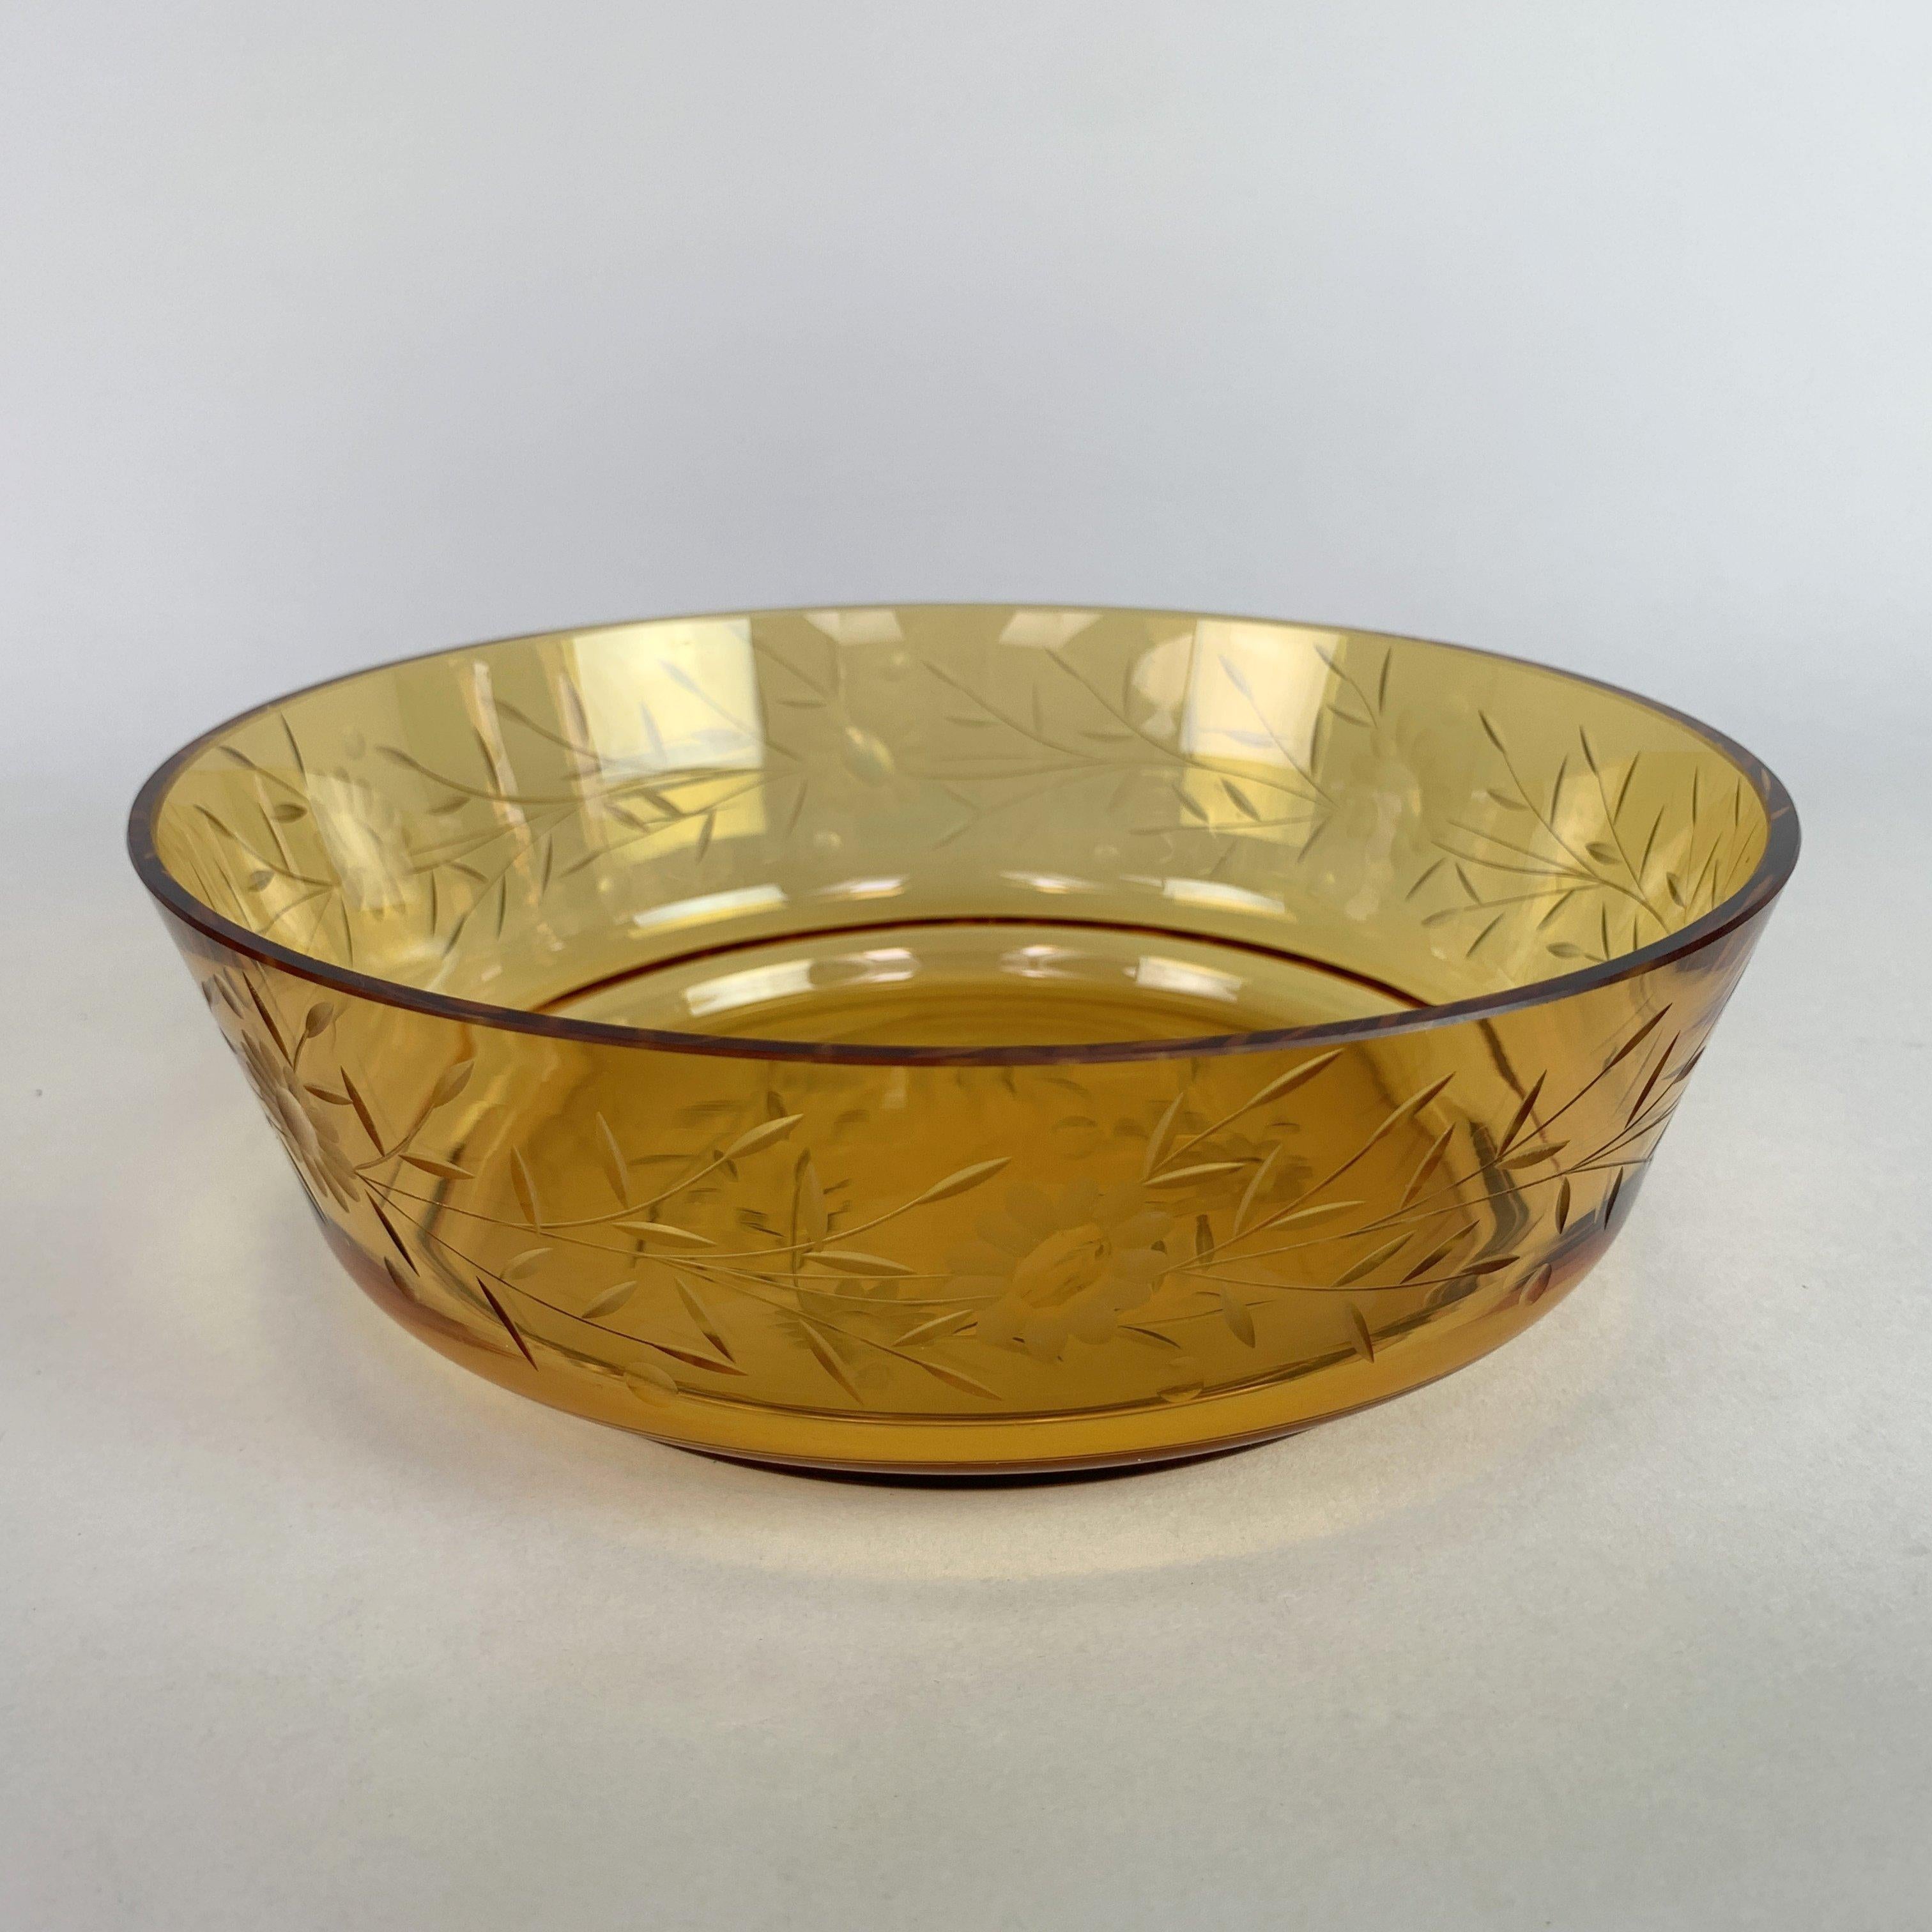 Bohemian vintage handcut amber glass bowl. Very good vintage condition. The item is approximately 6,5 cm high and 20,7 cm wide.